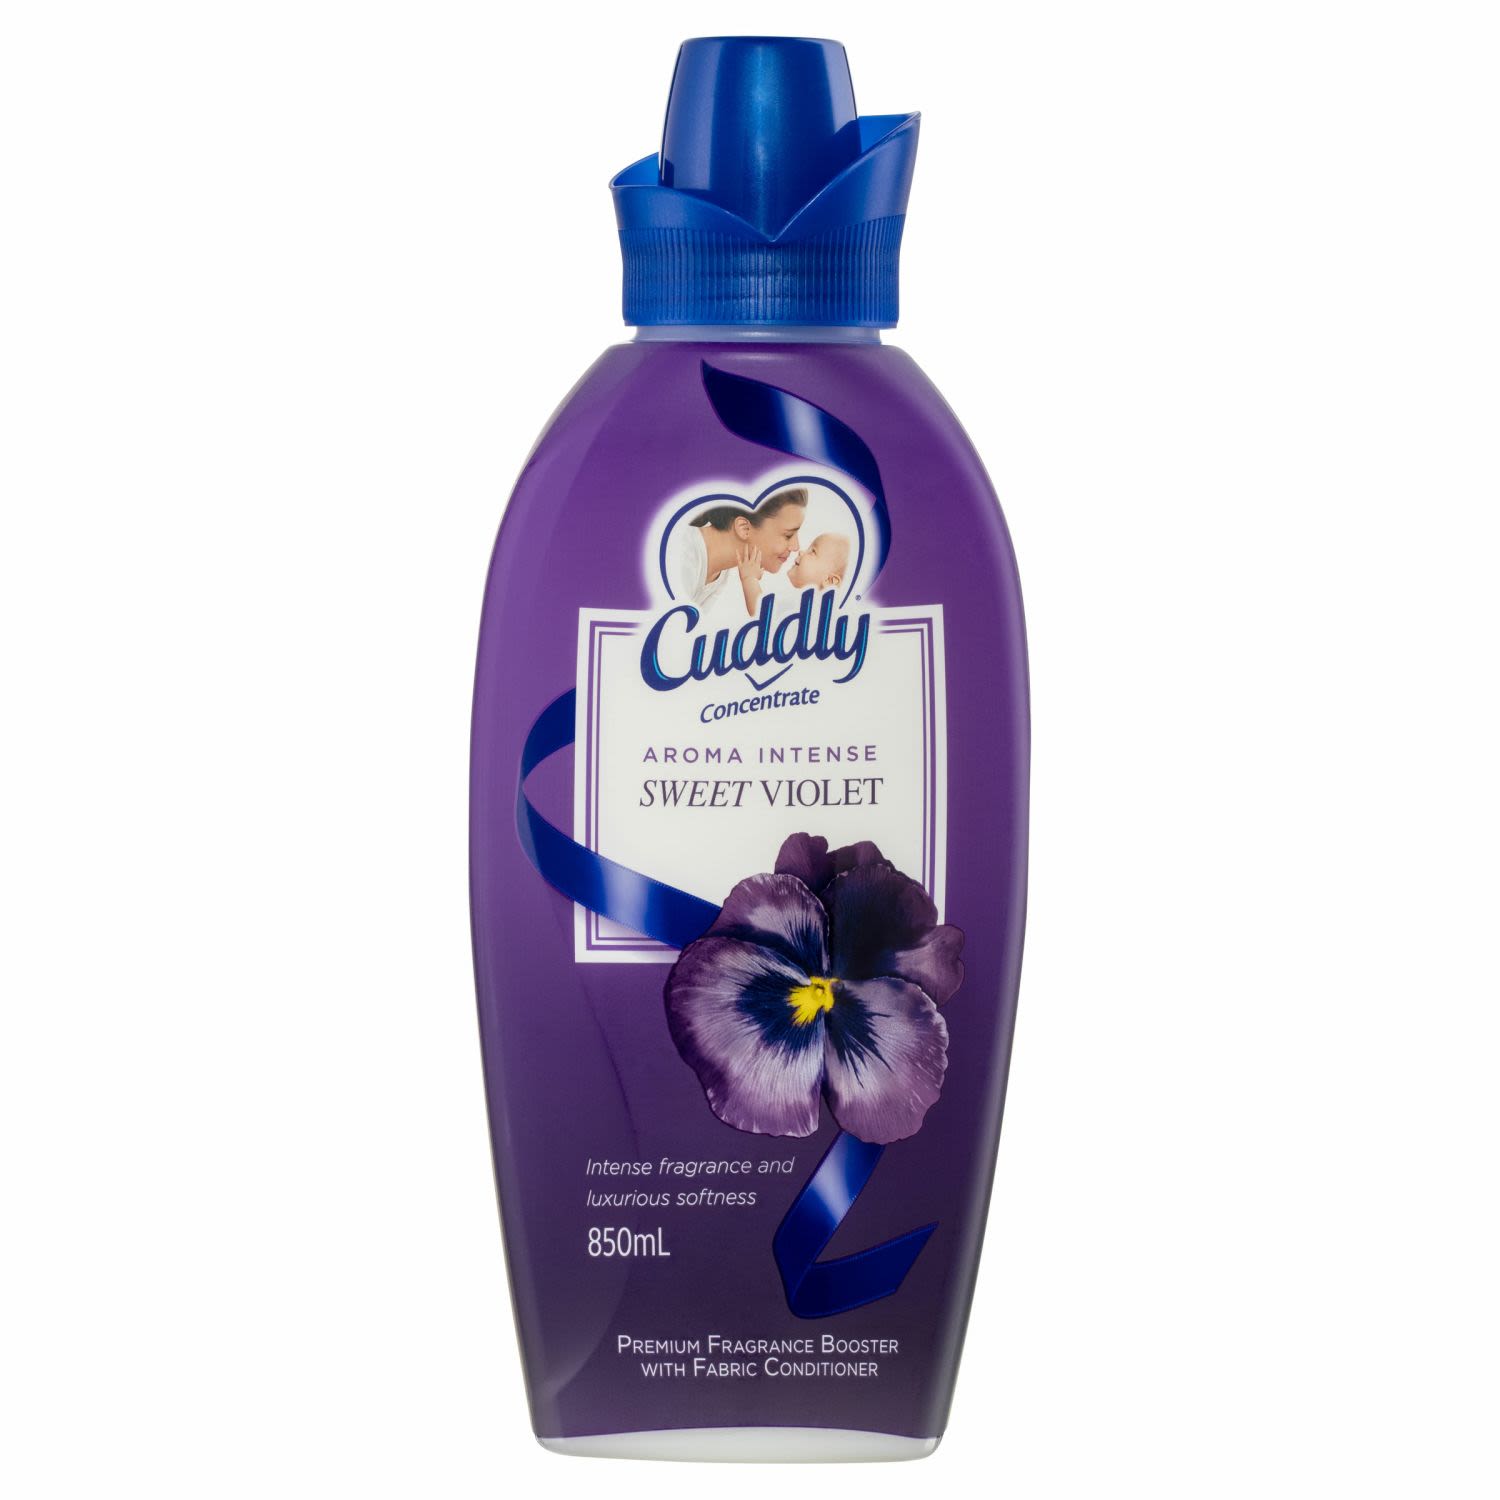 Cuddly Concentrate Fabric Softener Conditioner Aroma Intense Fragrance Booster Sweet Violet, 850 Millilitre